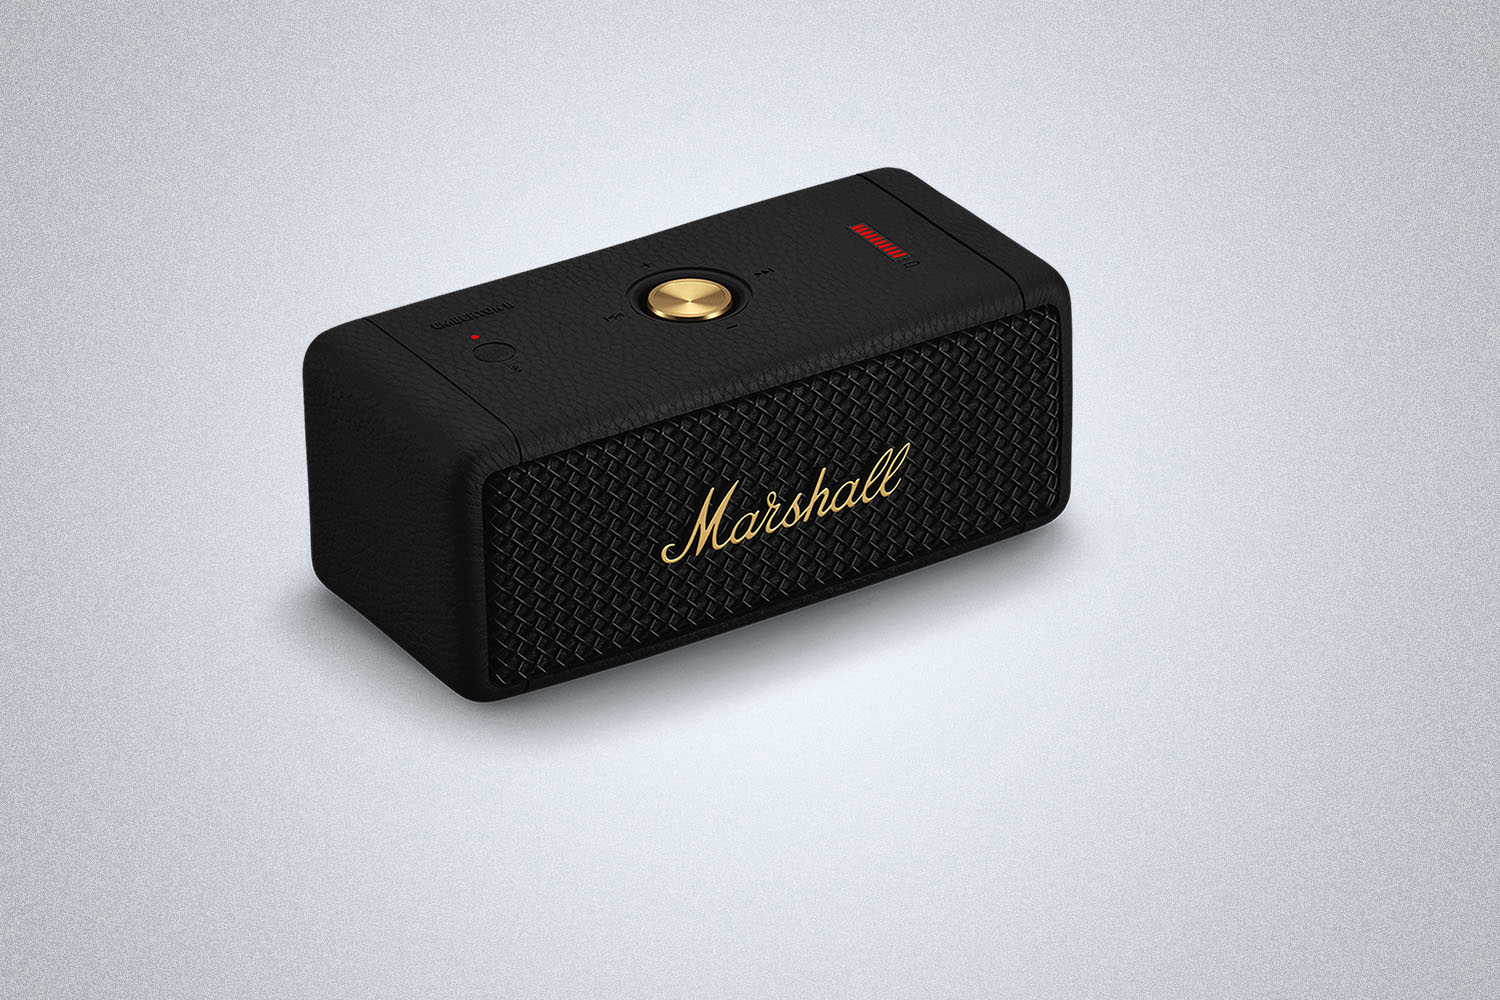 a black speaker with gold accents from Marshall on a gray background